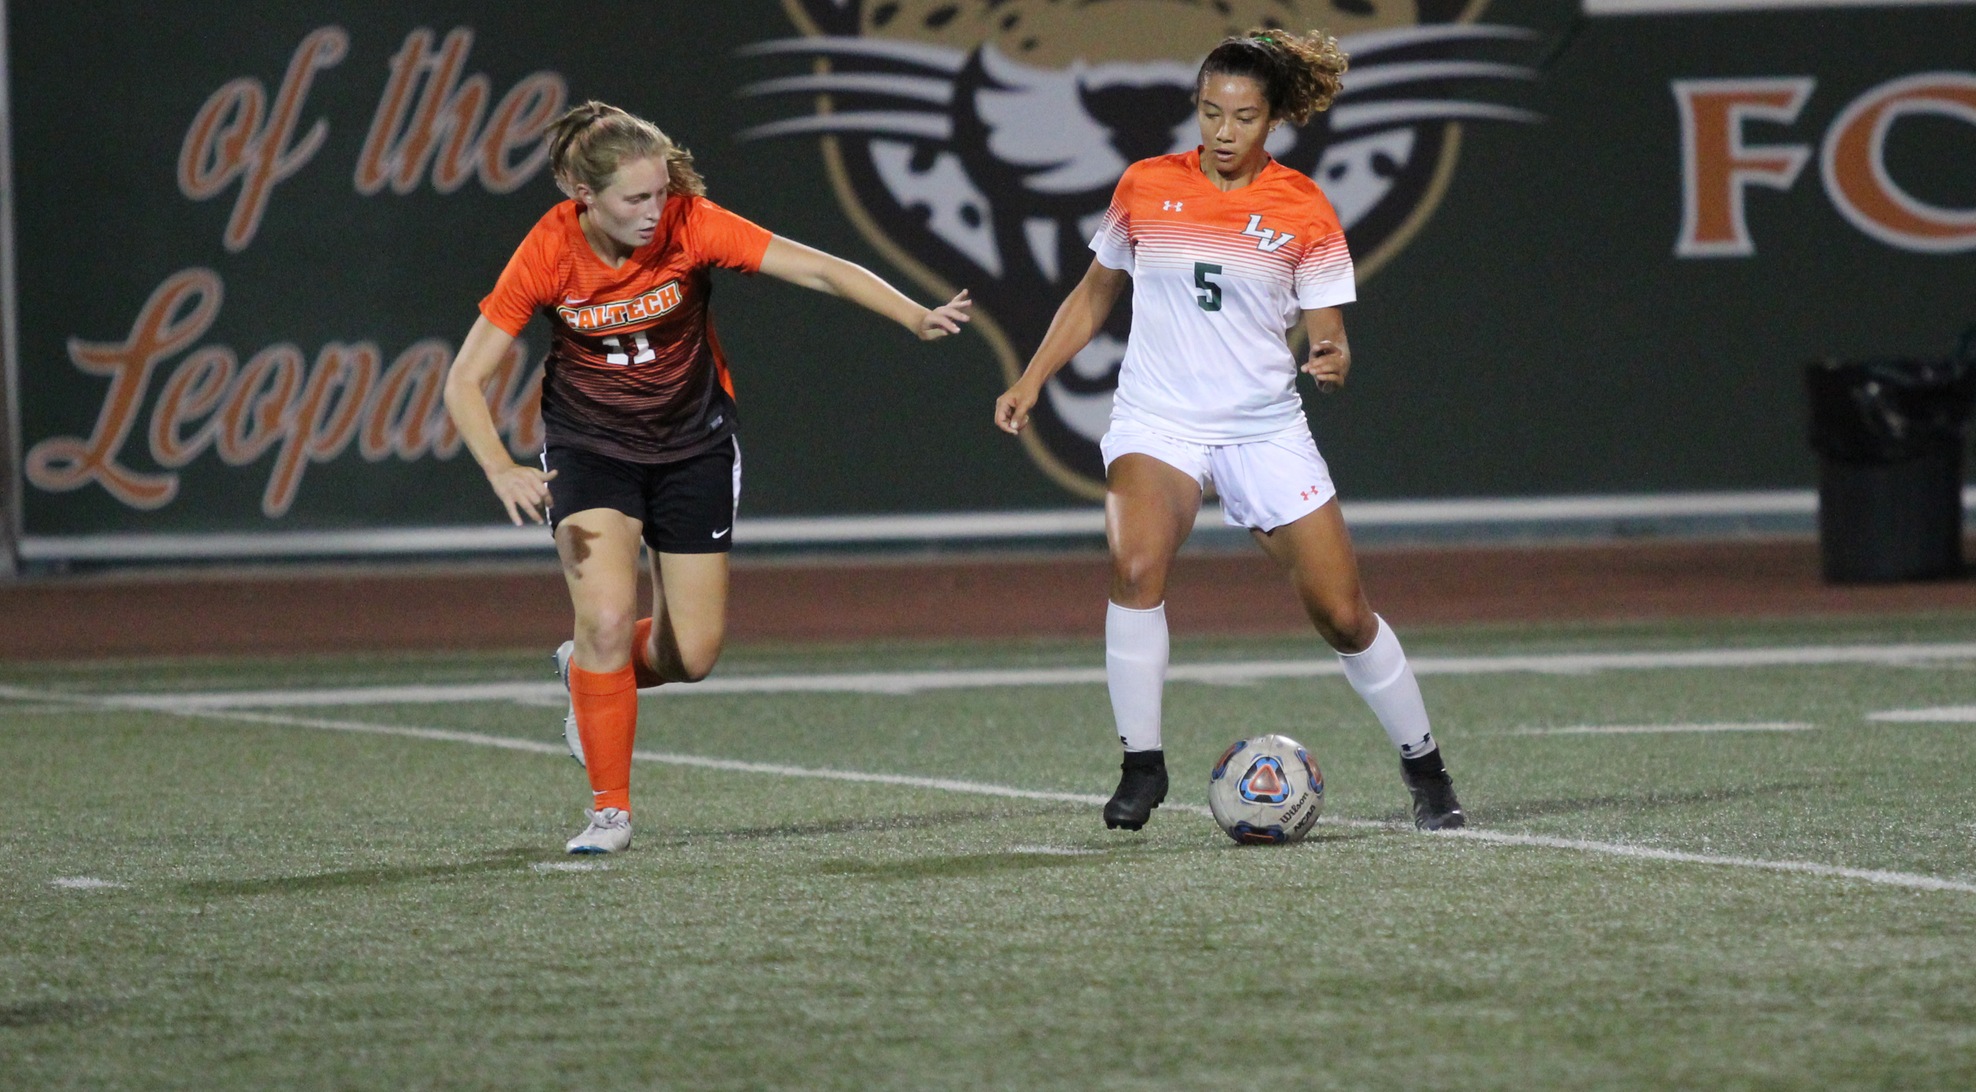 Women's Soccer takes down Caltech at home